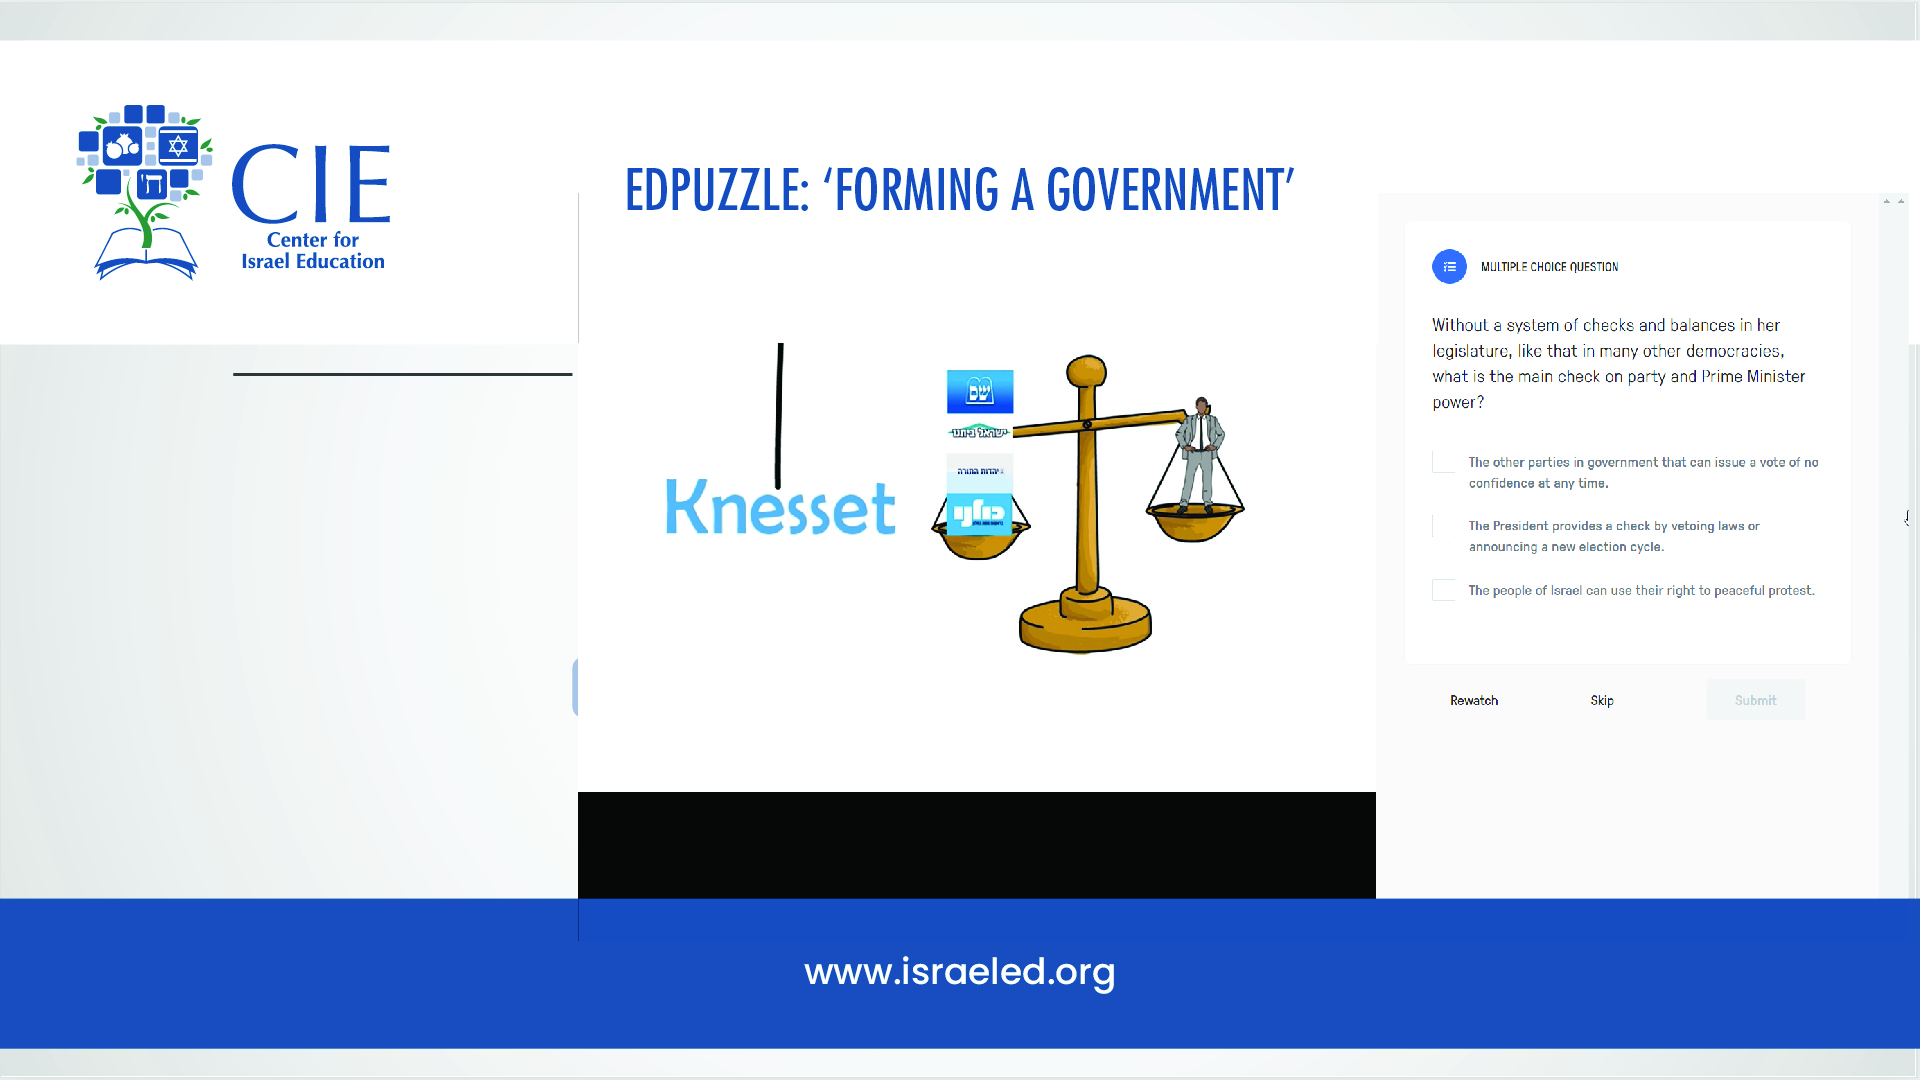 ACTIVITY: Edpuzzle for ‘Forming a Government’